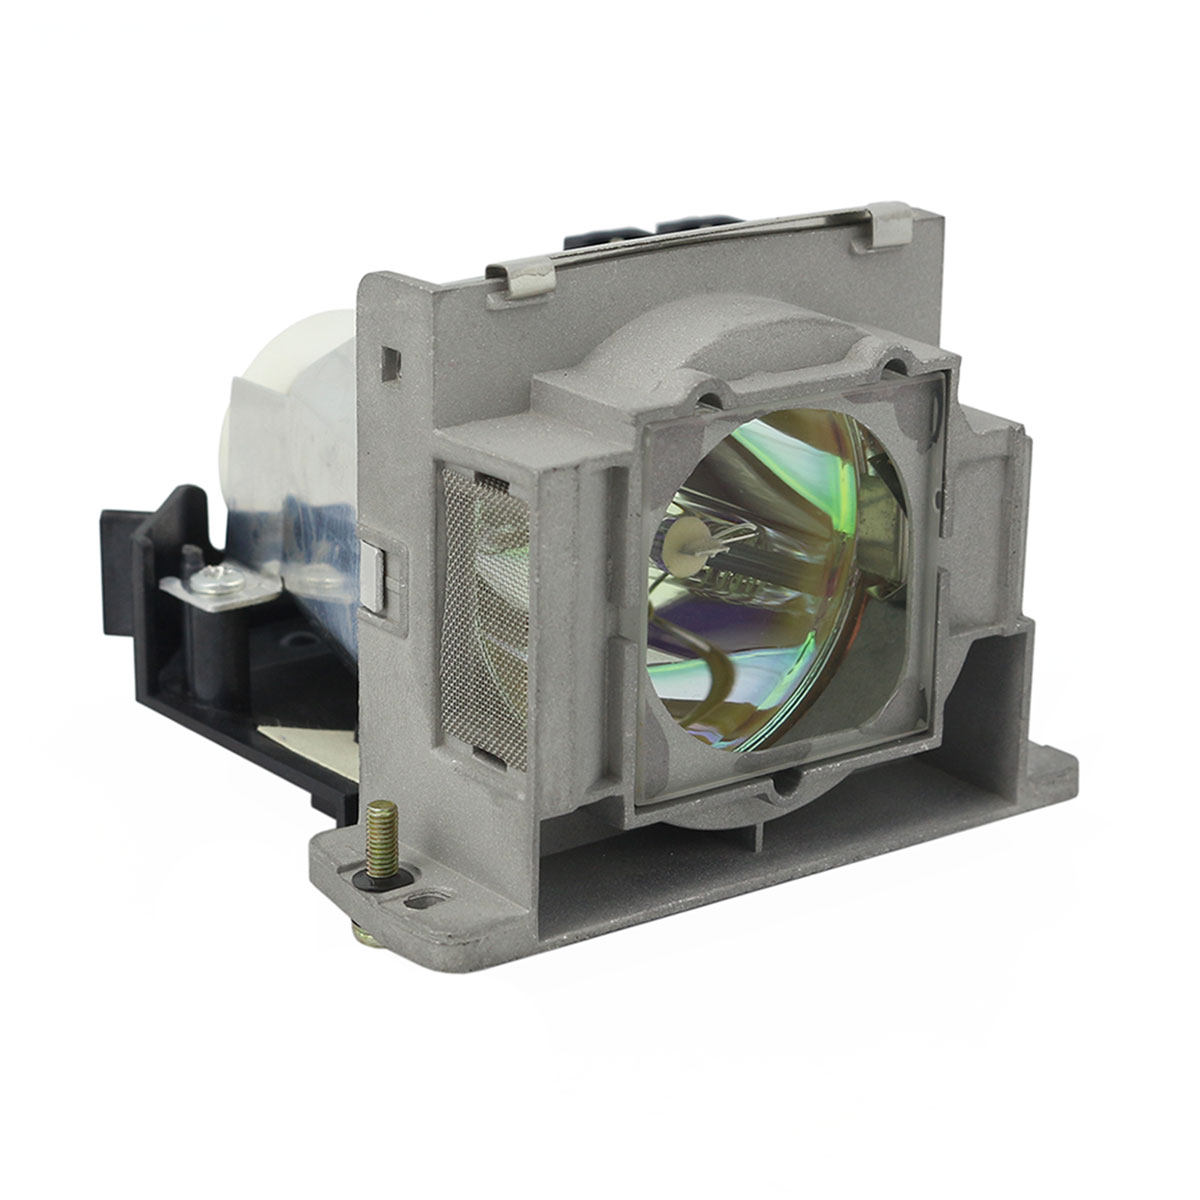 Osram PVIP Replacement Lamp & Housing for the Mitsubishi LVP-XD480U Projector - image 1 of 6